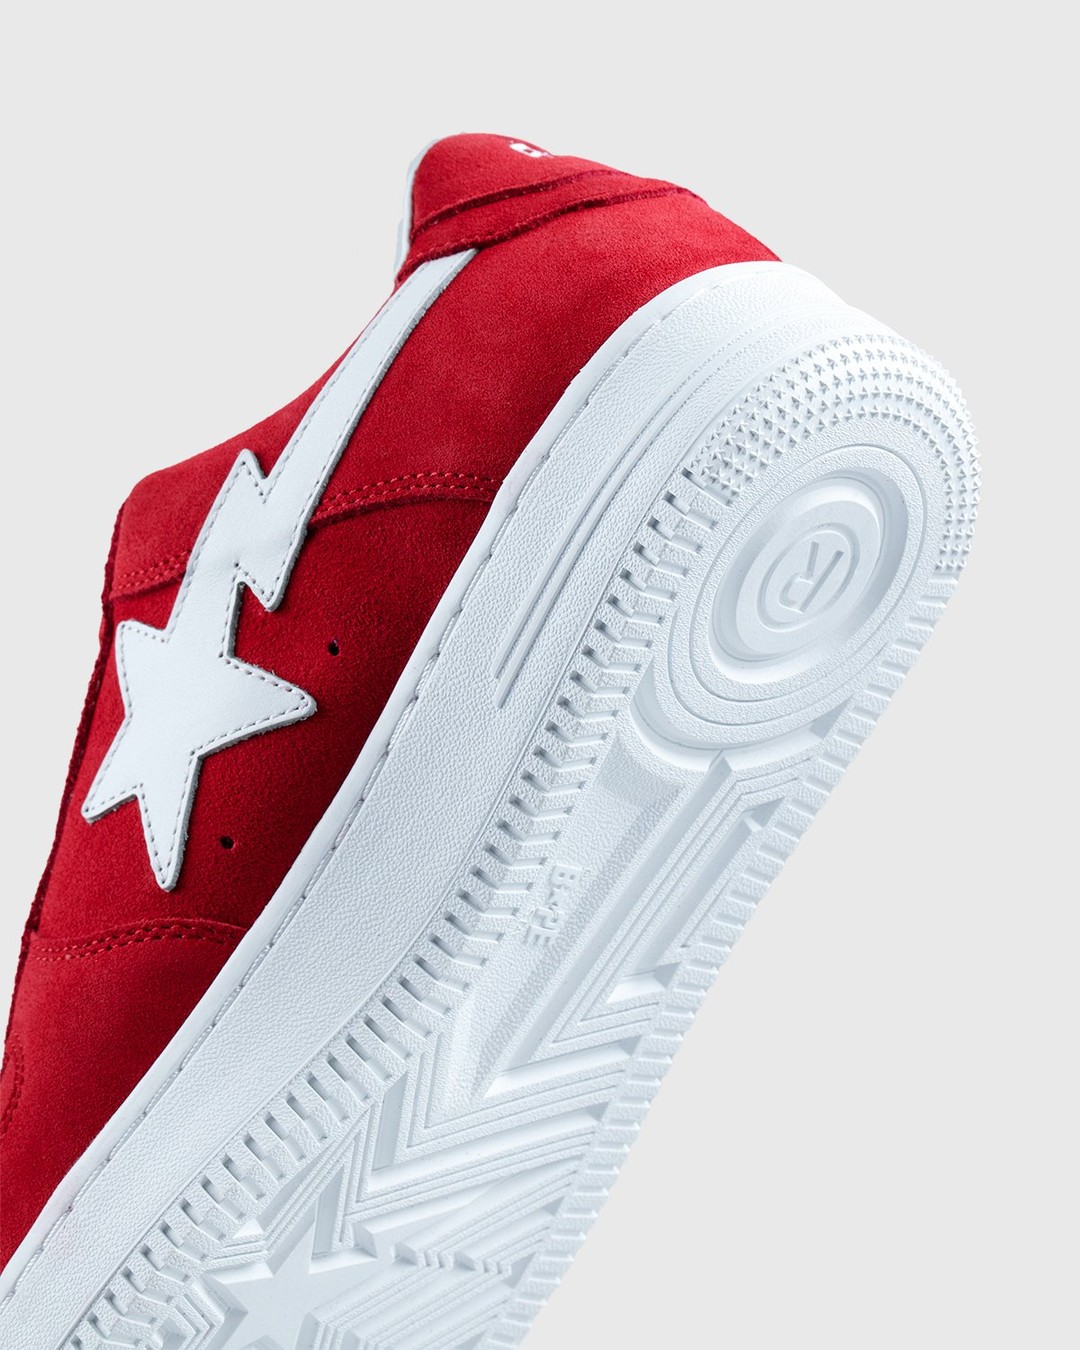 BAPE x Highsnobiety – BAPE STA Red - Sneakers - Red - Image 5